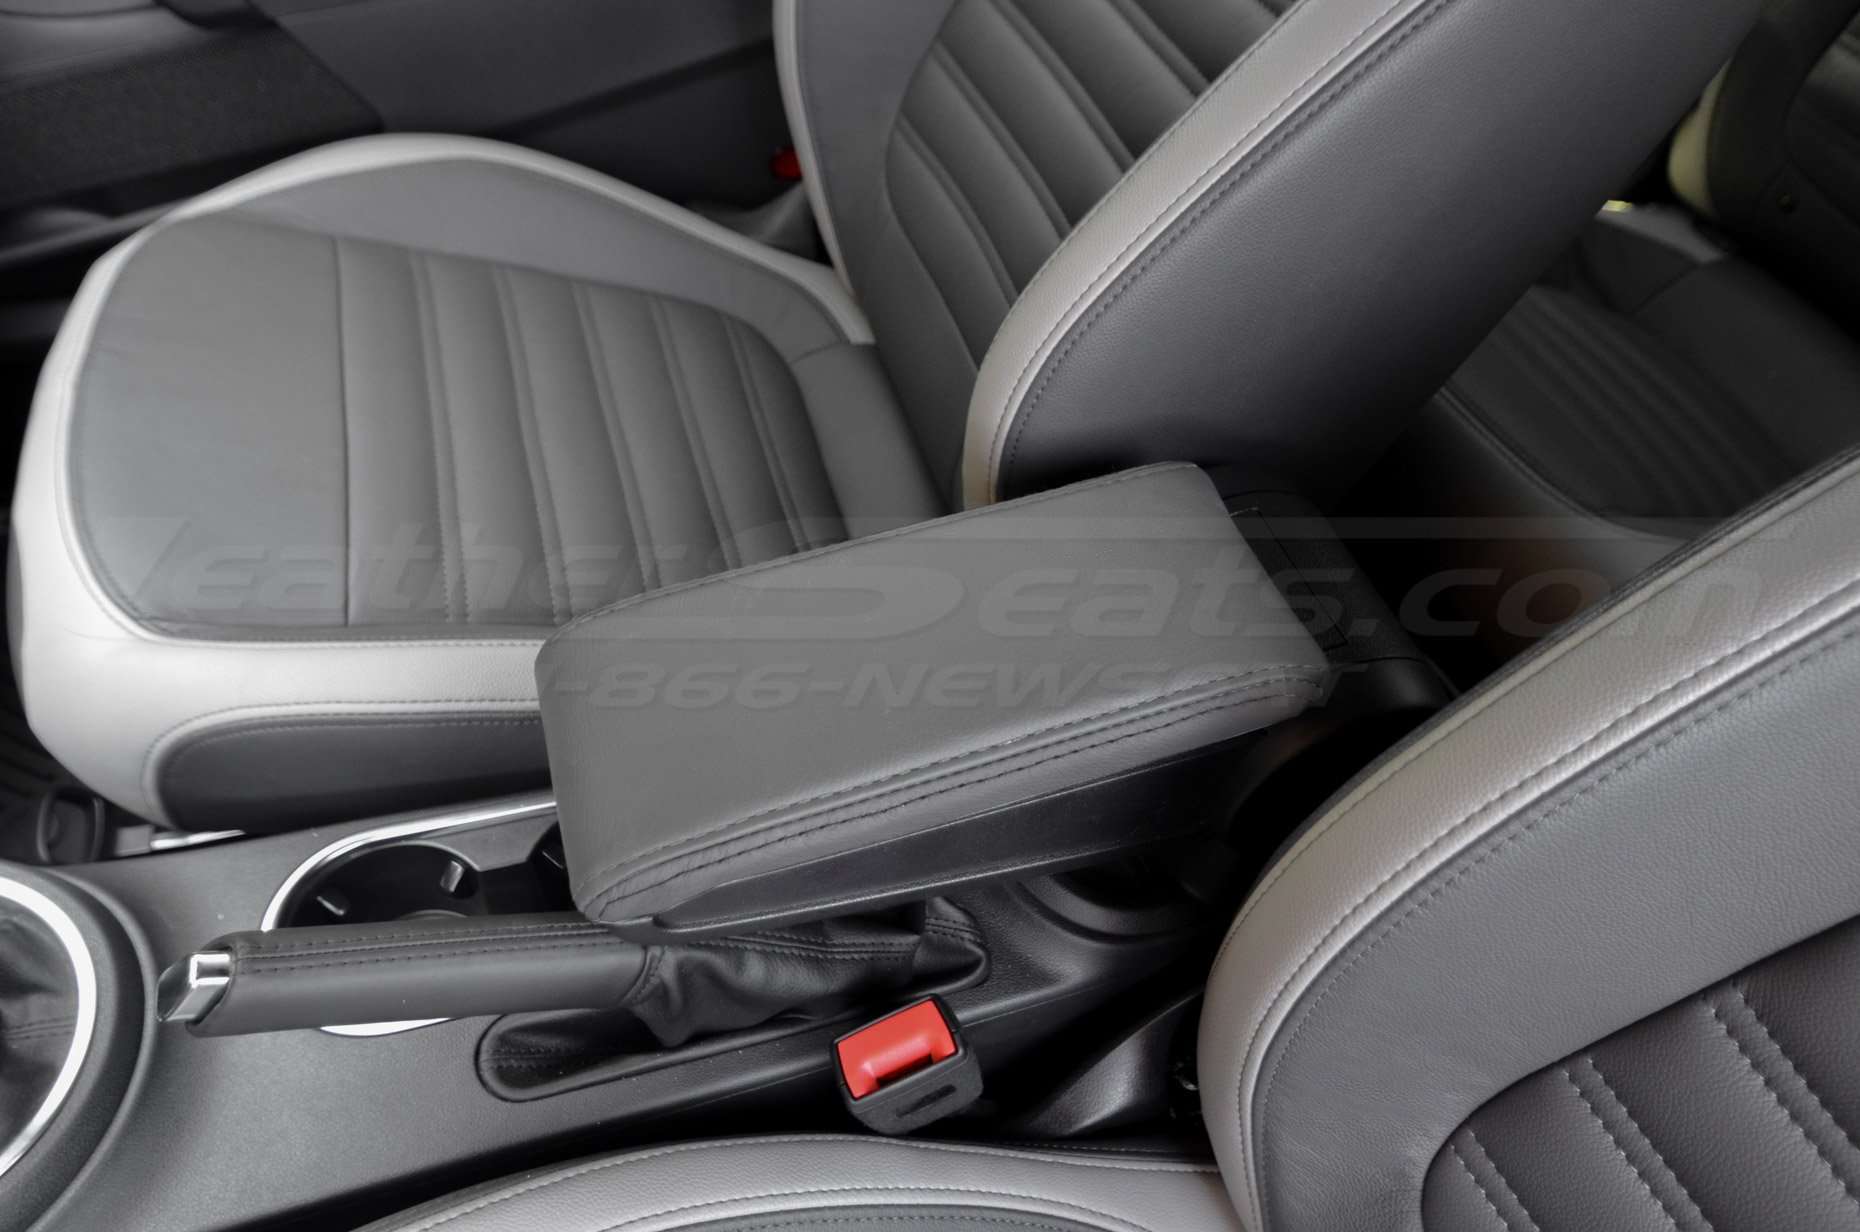 Light Grey leather Volkswagen Beetle leather console lid cover